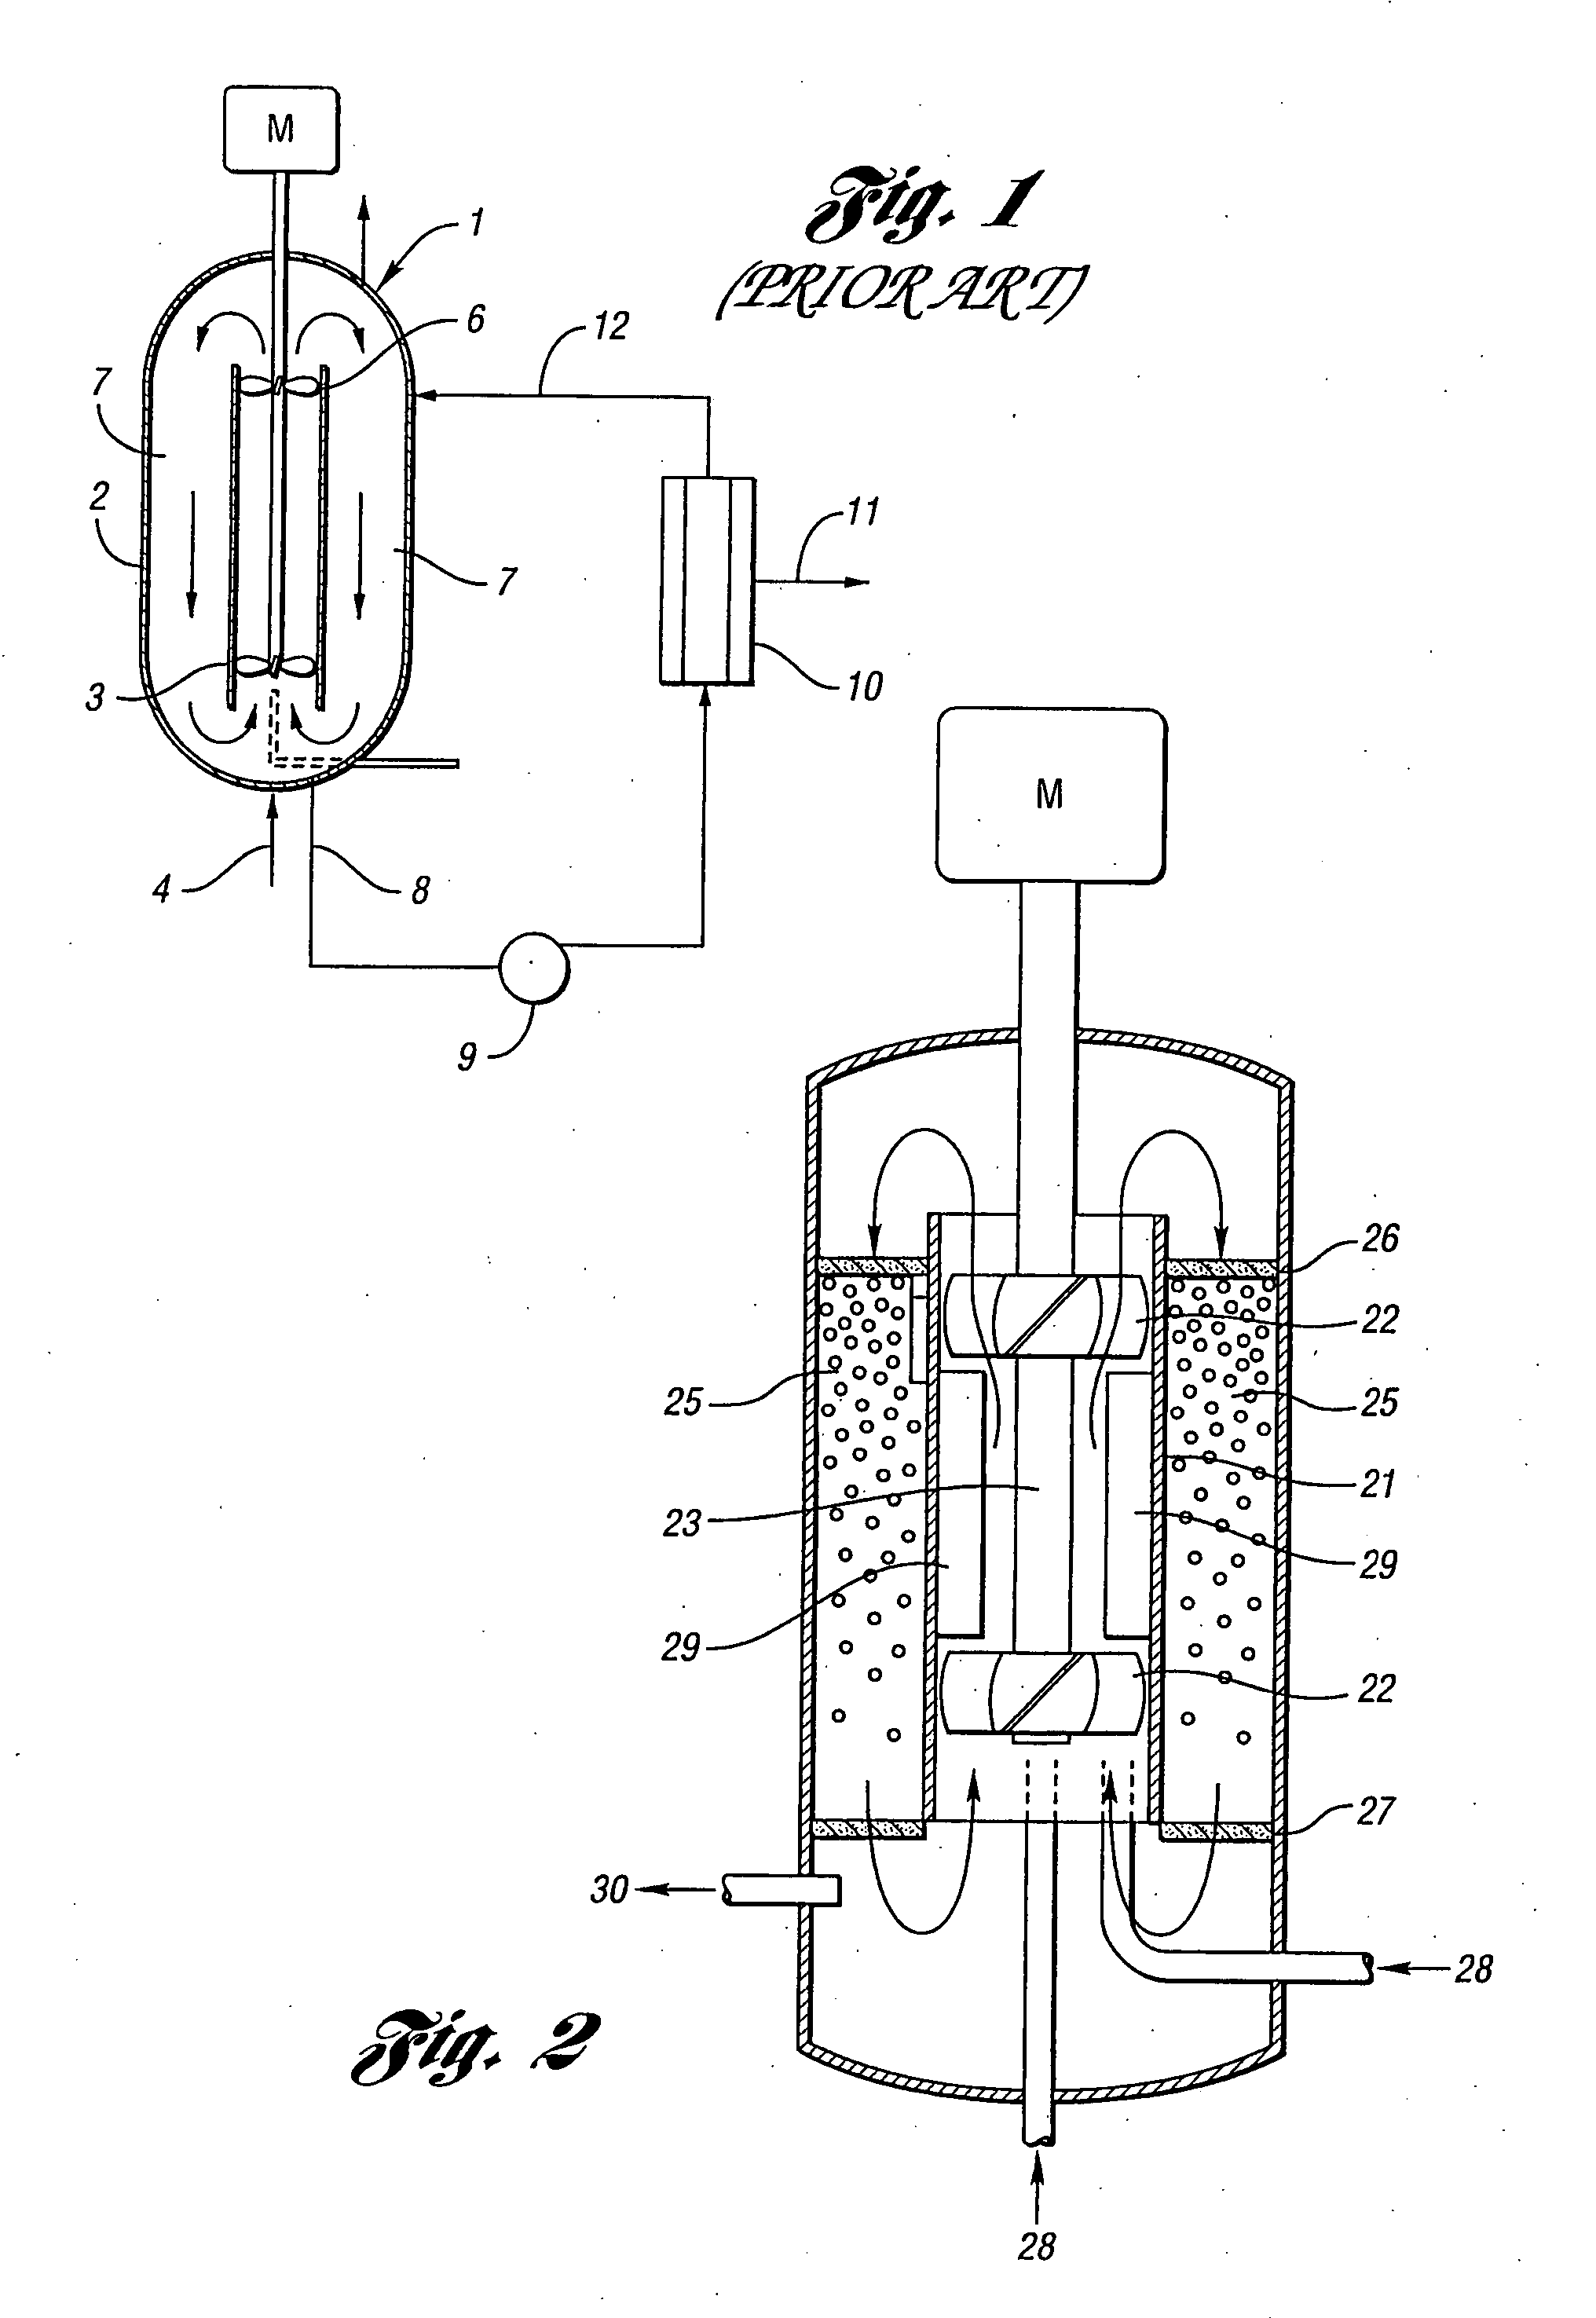 Multiphase reactor design incorporating filtration system for fixed--bed catalyst